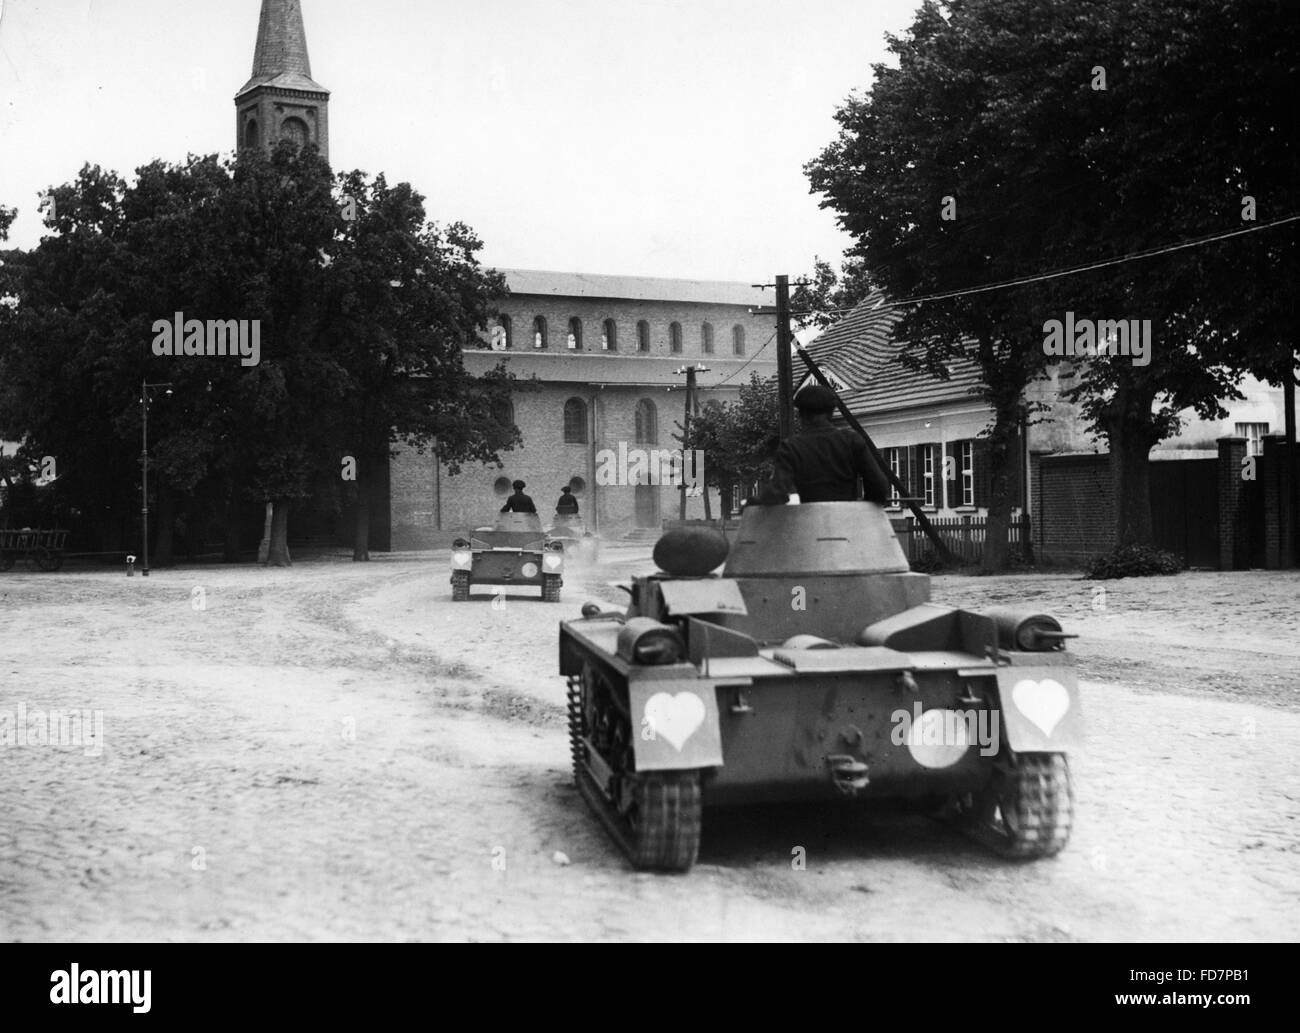 Panzer I pass through a town in the 30s Stock Photo